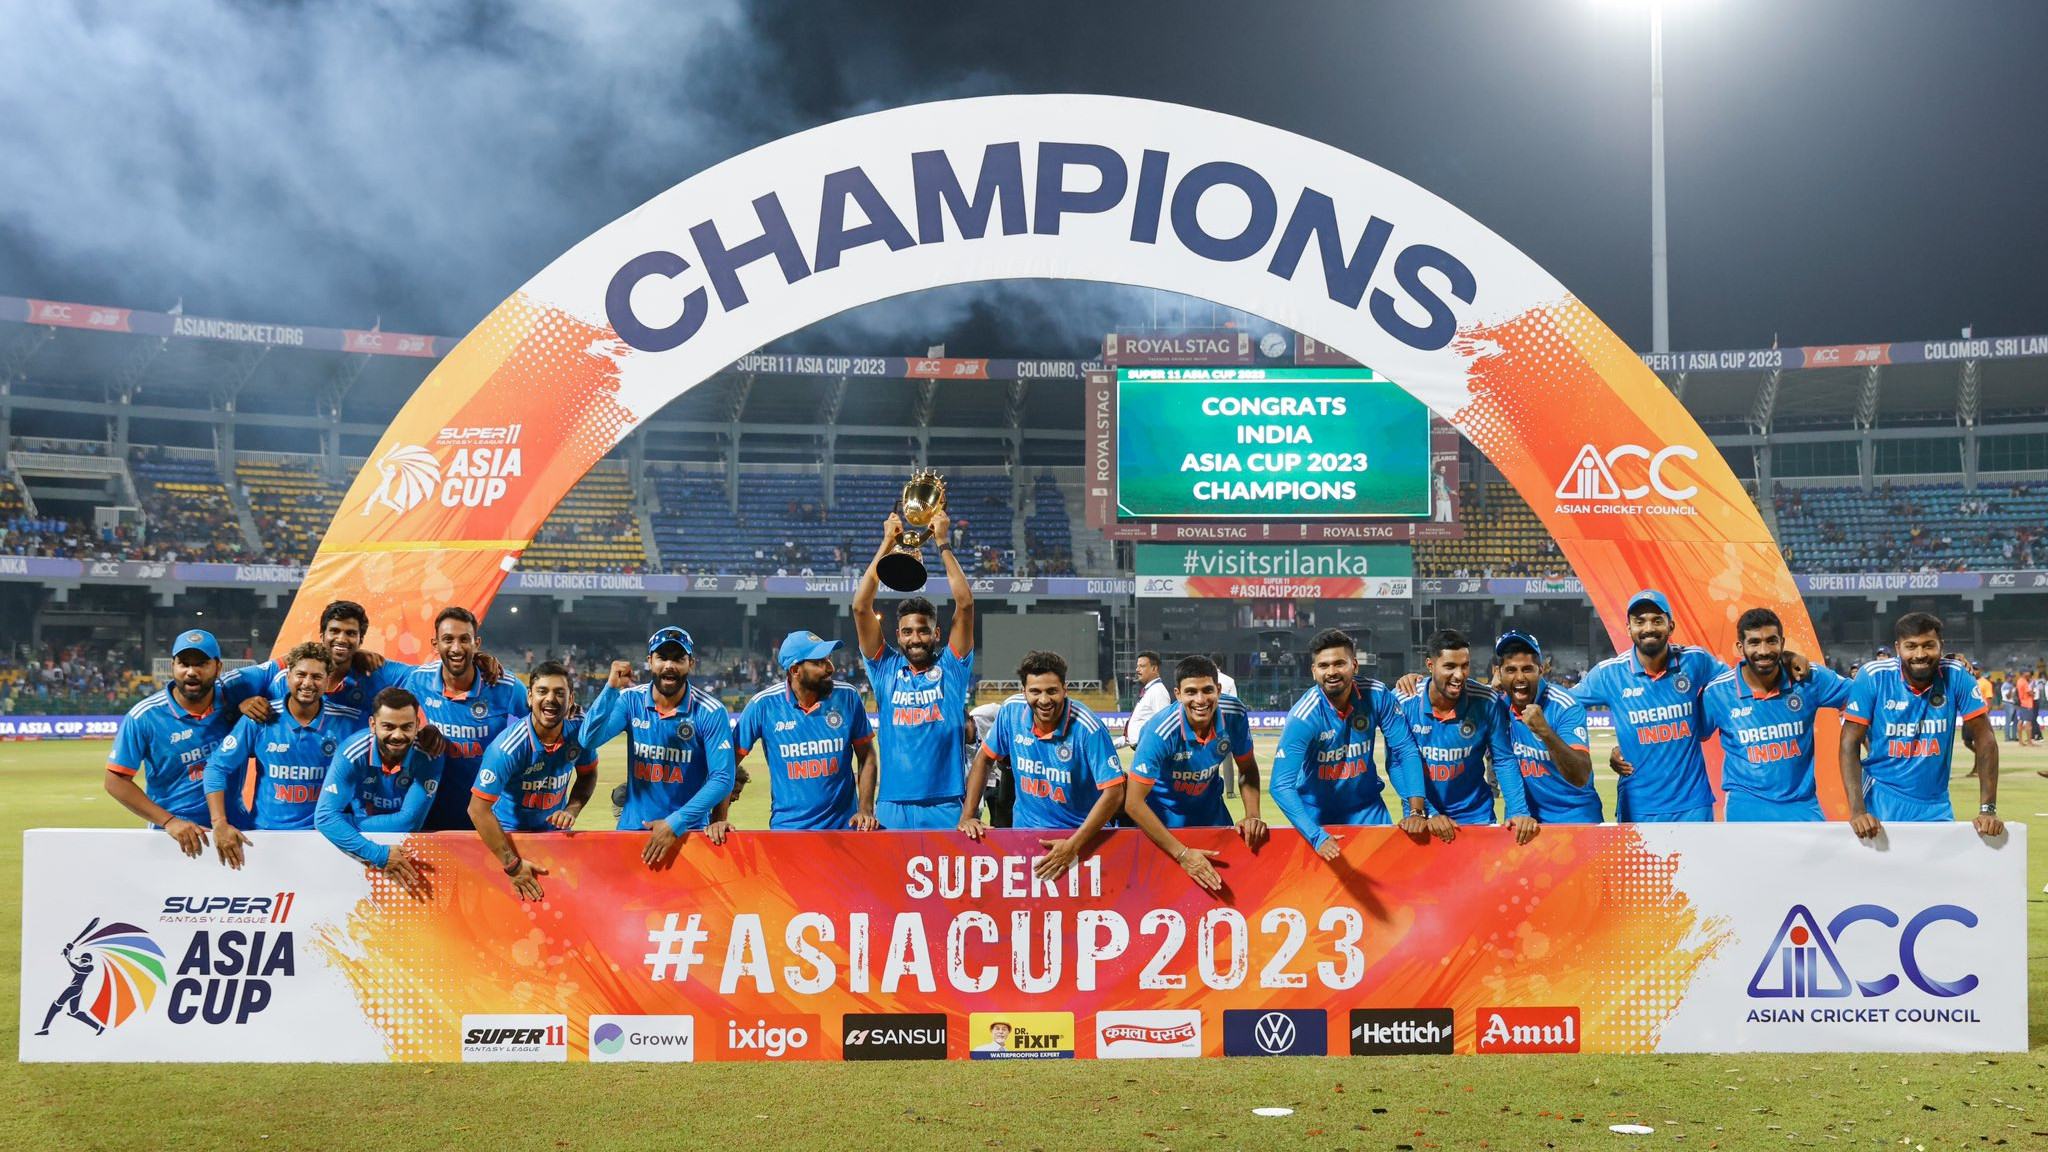 Asia Cup 2023: Team India members celebrate Asia Cup triumph on social media